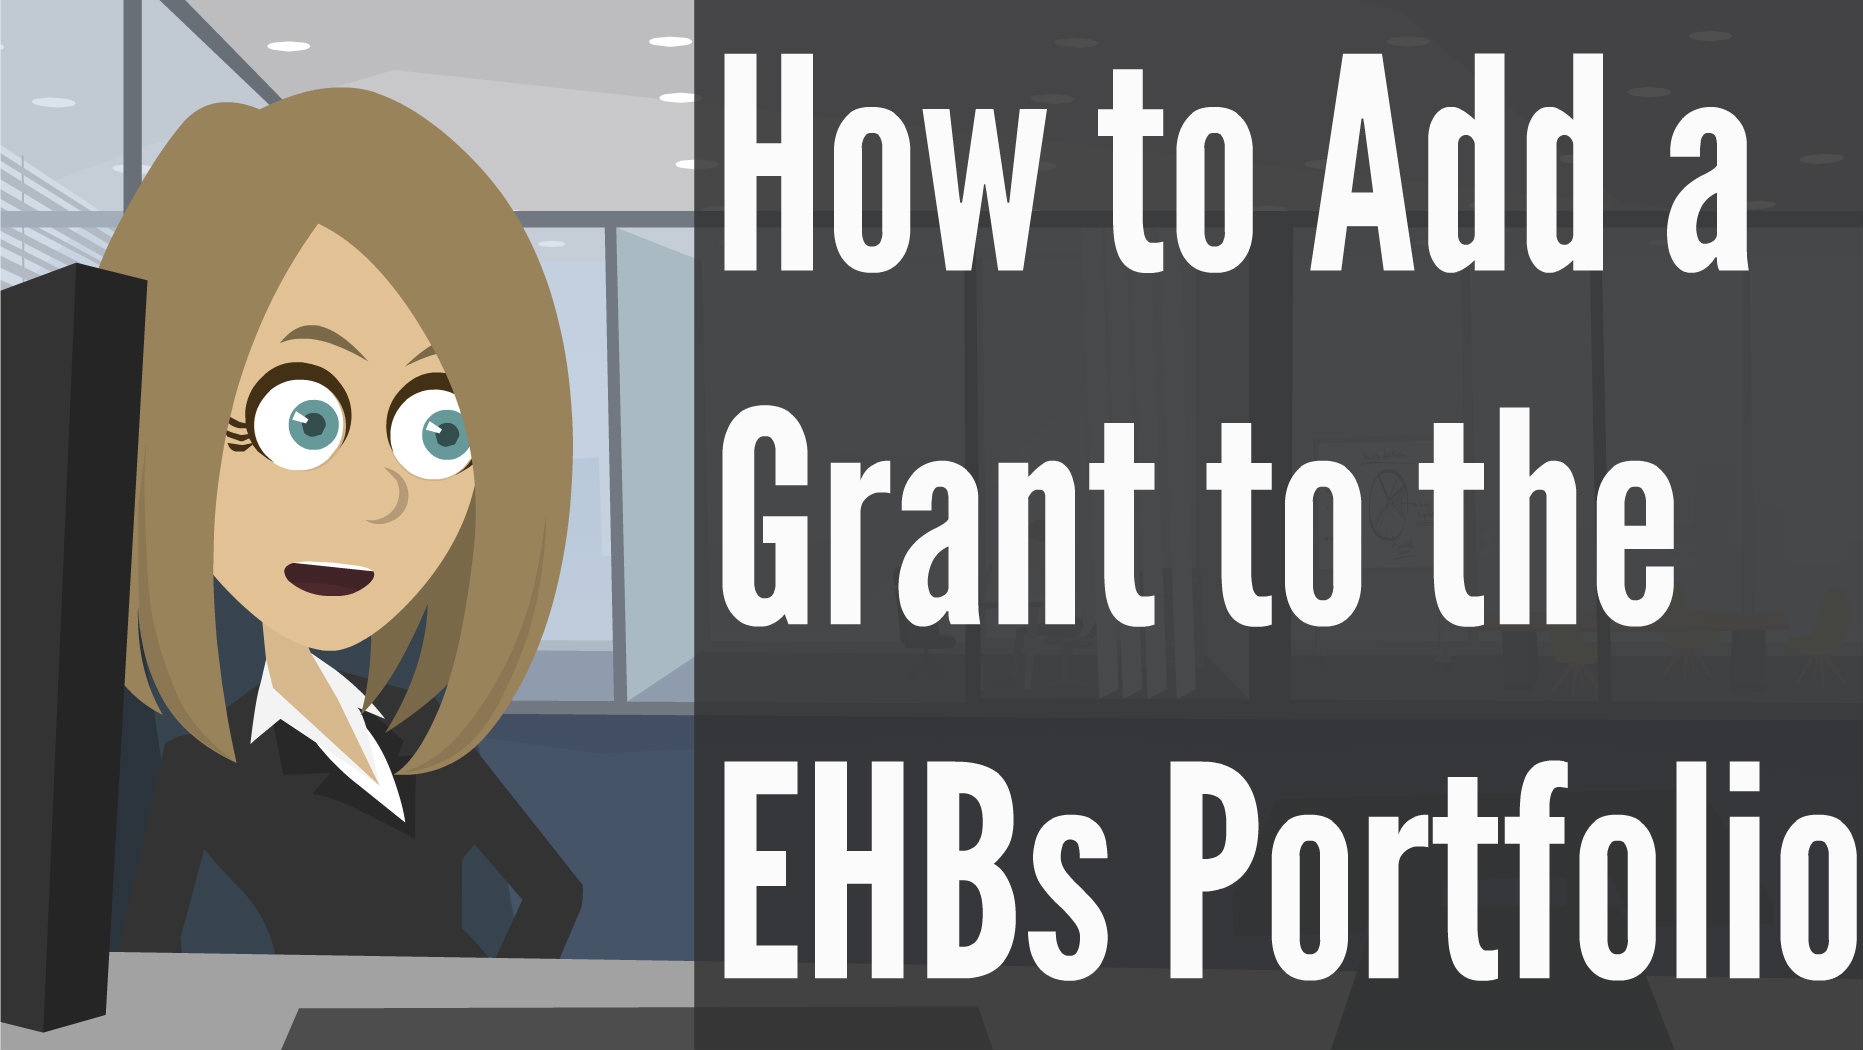 Image and Shortcut to How to Add a Grant to the EHBs Portfolio